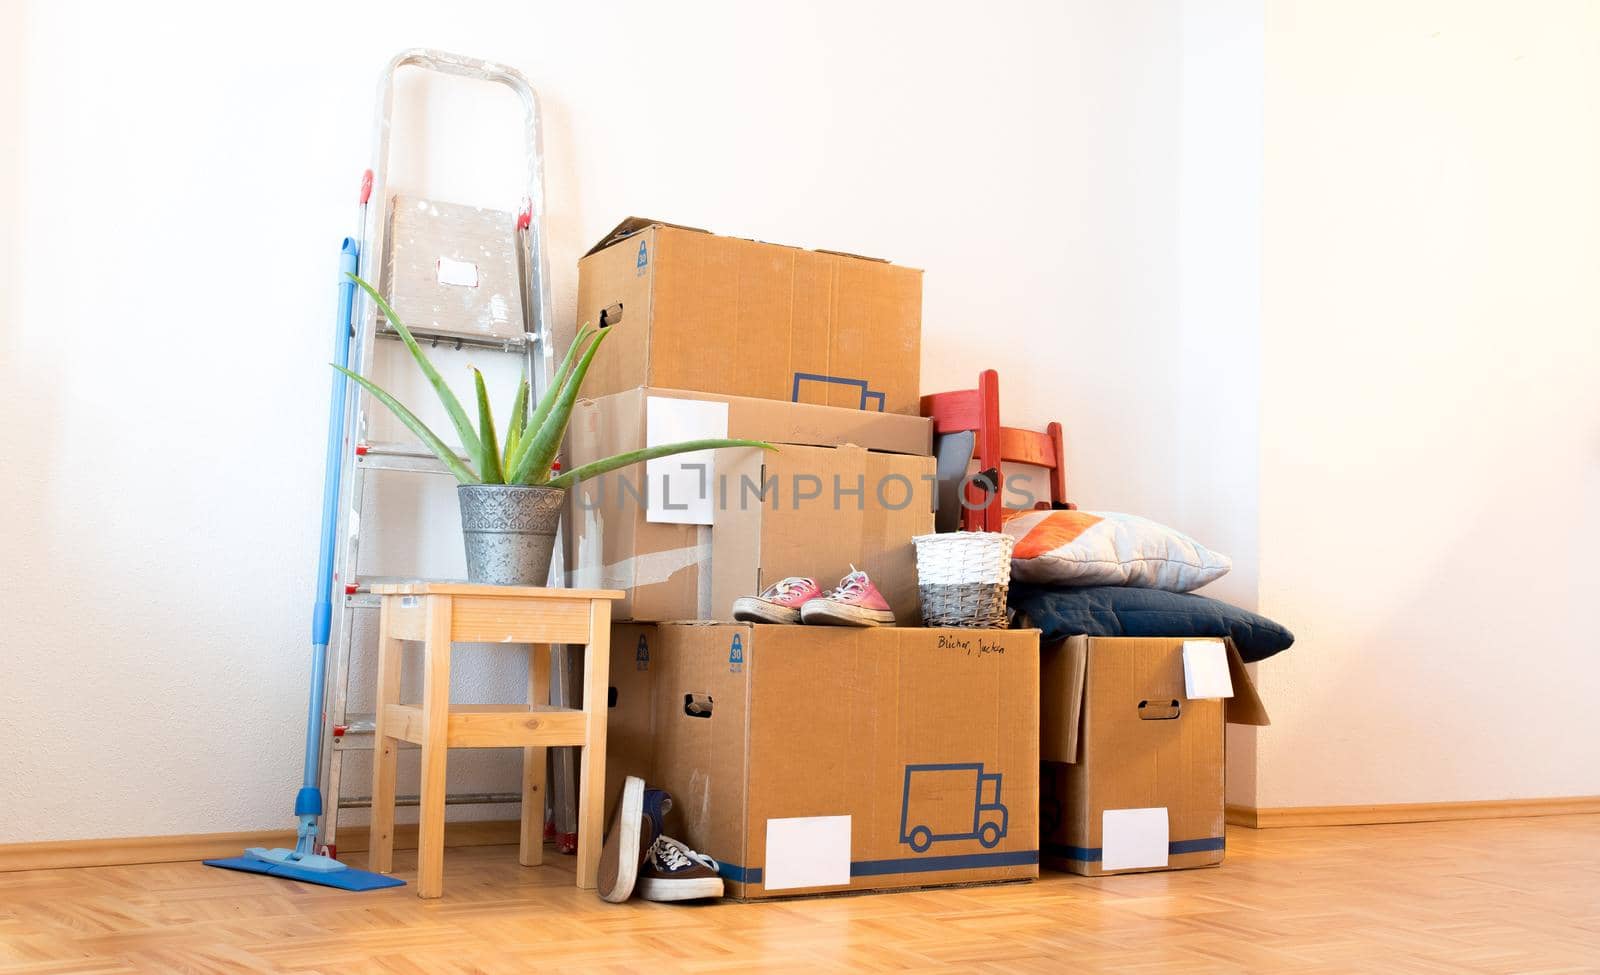 Move. Cardboard boxes, cleaning things and stuff for moving into a new, clean and bright home by Daxenbichler